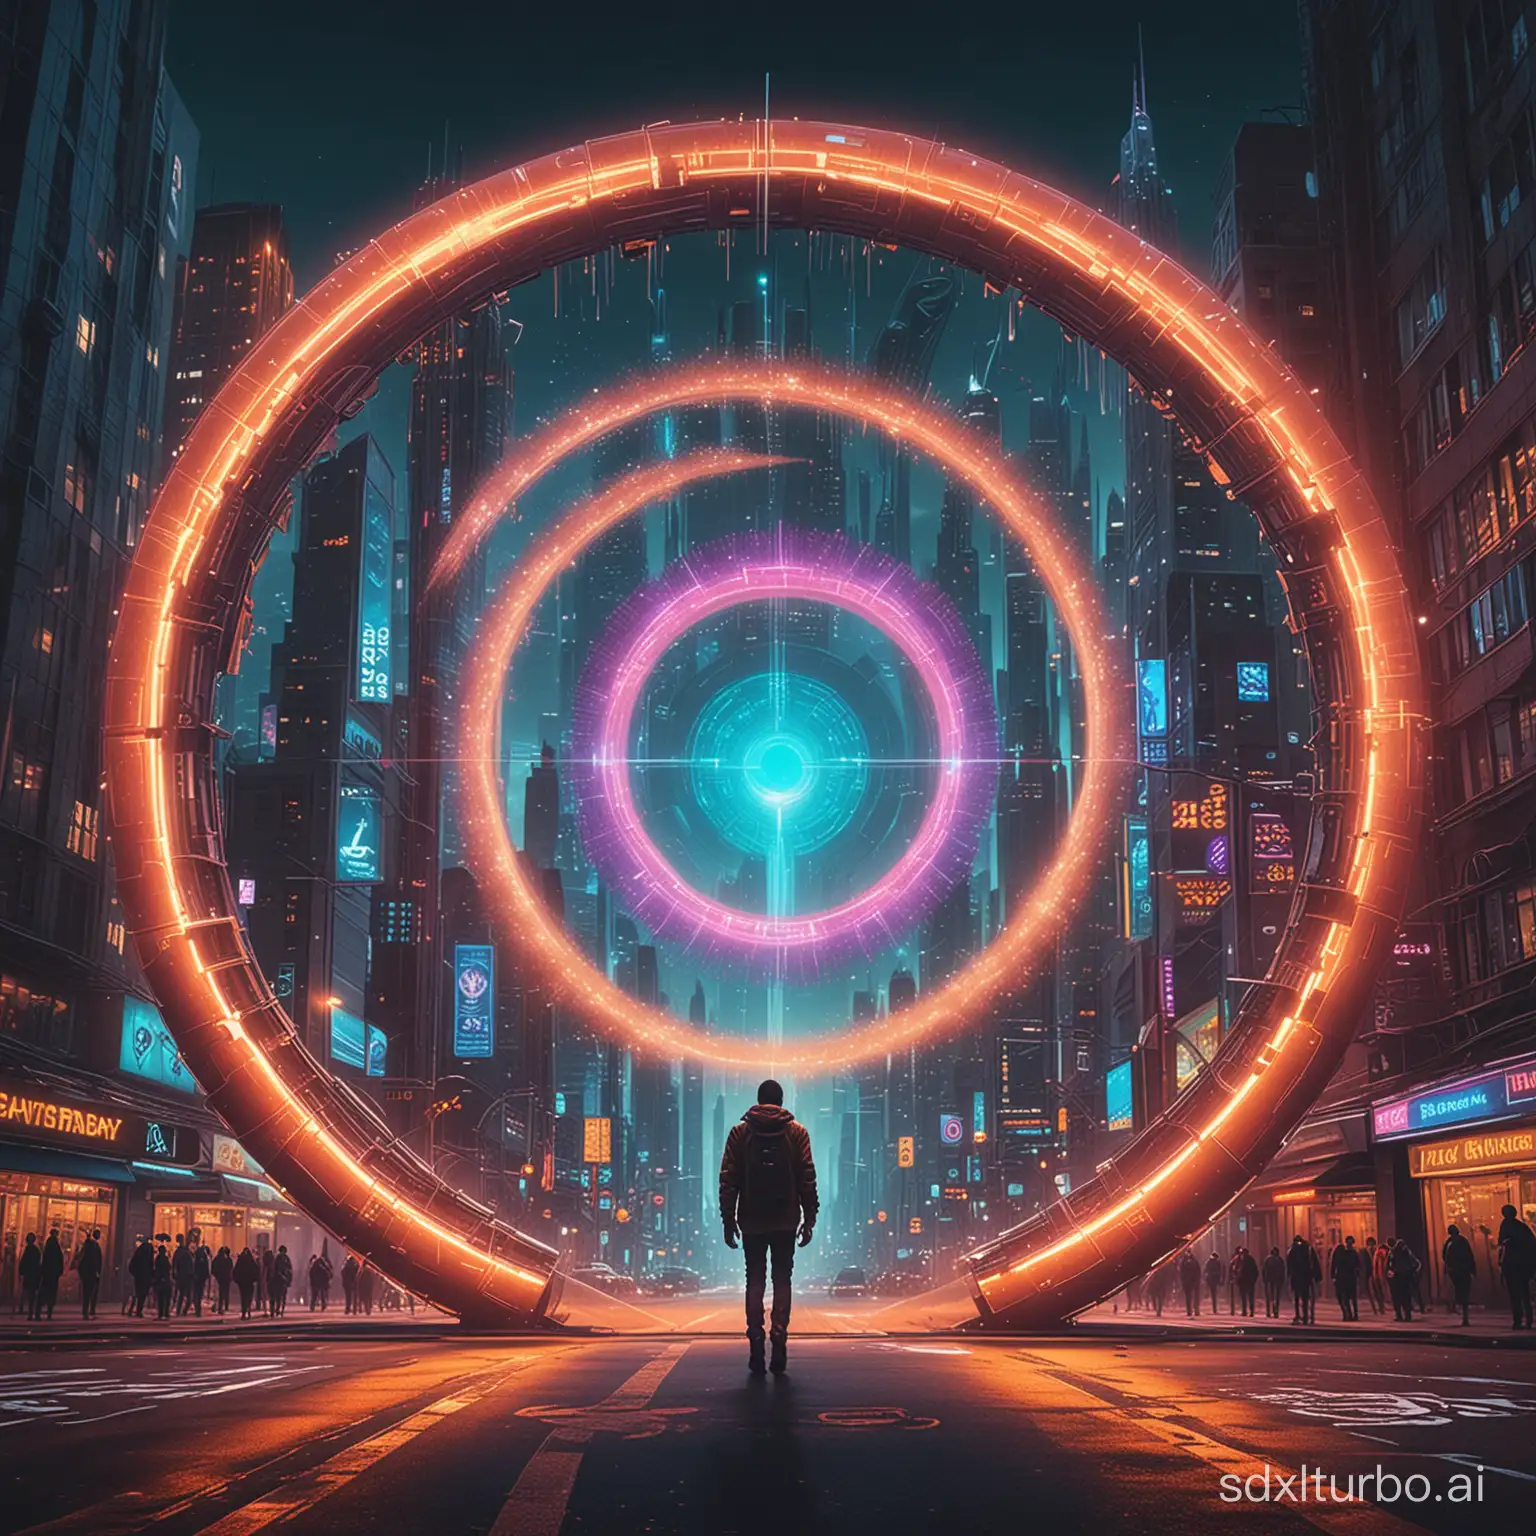 Stunning surreal, optical illusion hyperreal image of a complex glowing giant circular portal made of colored lights built into a cyberpunk style city and streets with skyscrapers and flying cars scattered throughout, Gateway to the futuristic city, a silhouette of a medieval man walking inside, super colorful, super detailed, intricate